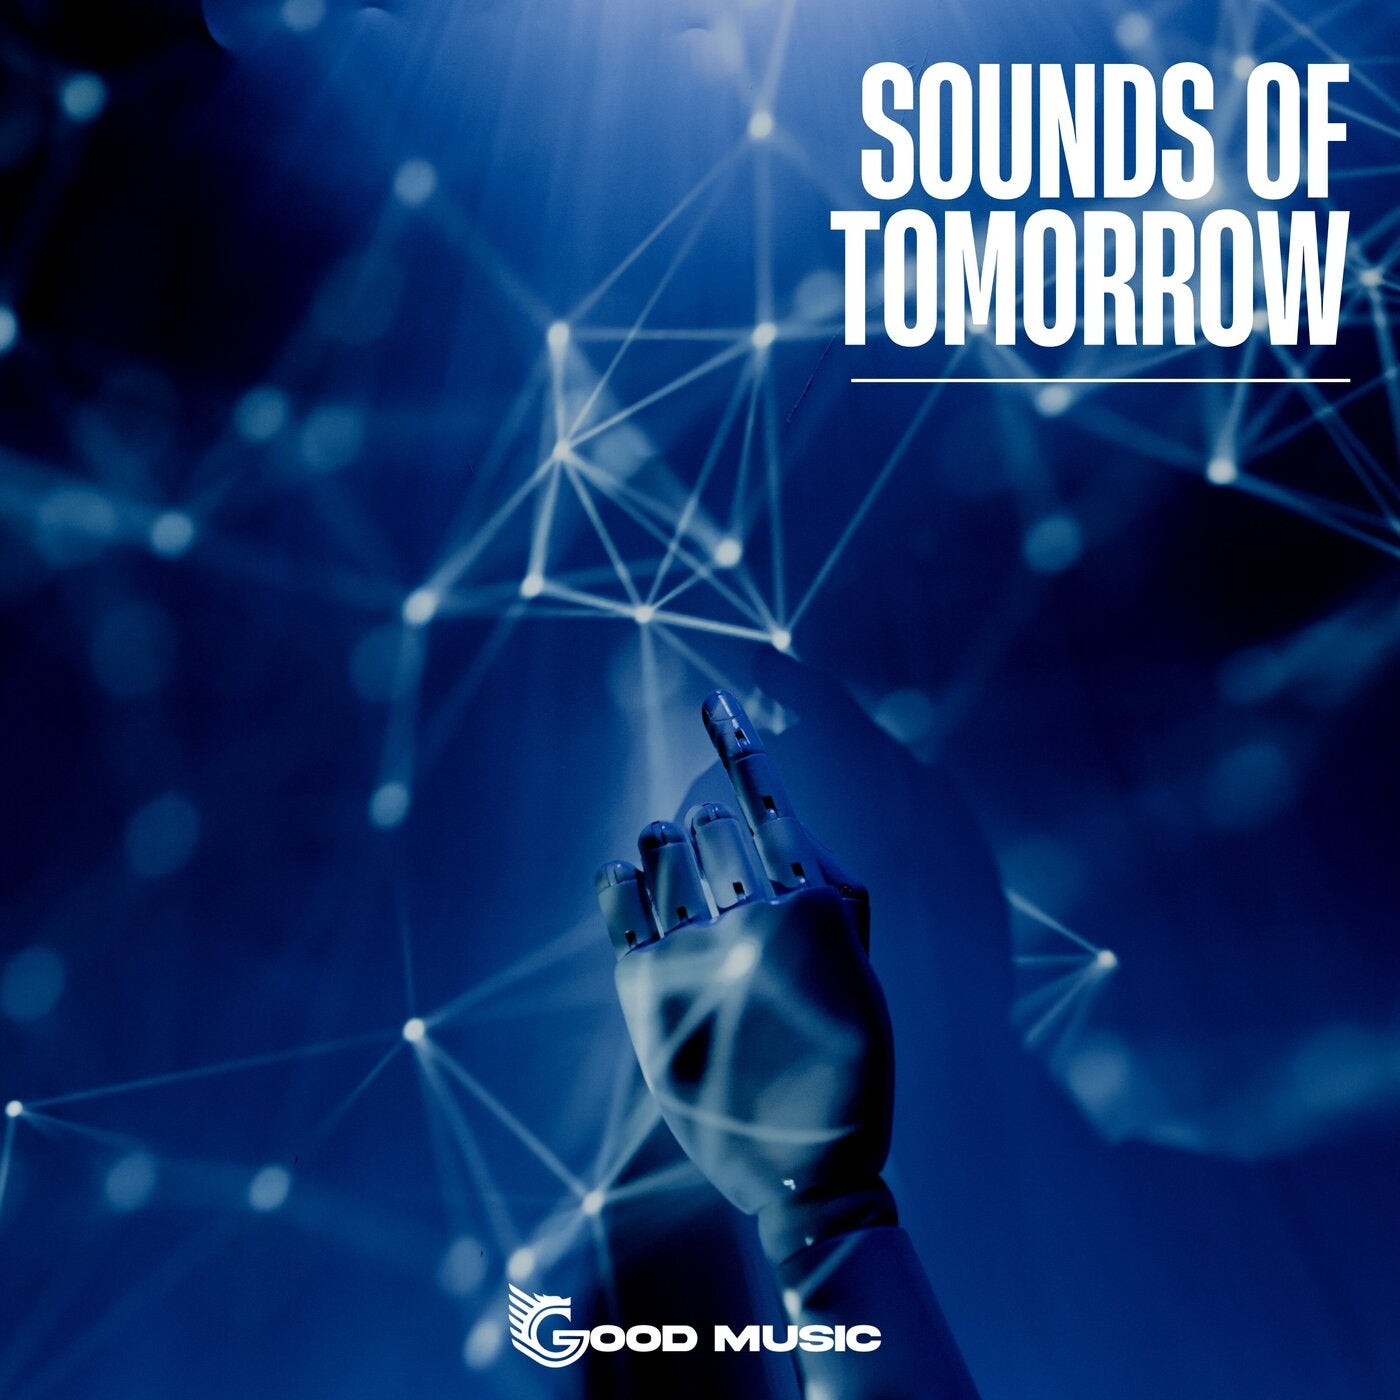 Sounds of Tomorrow